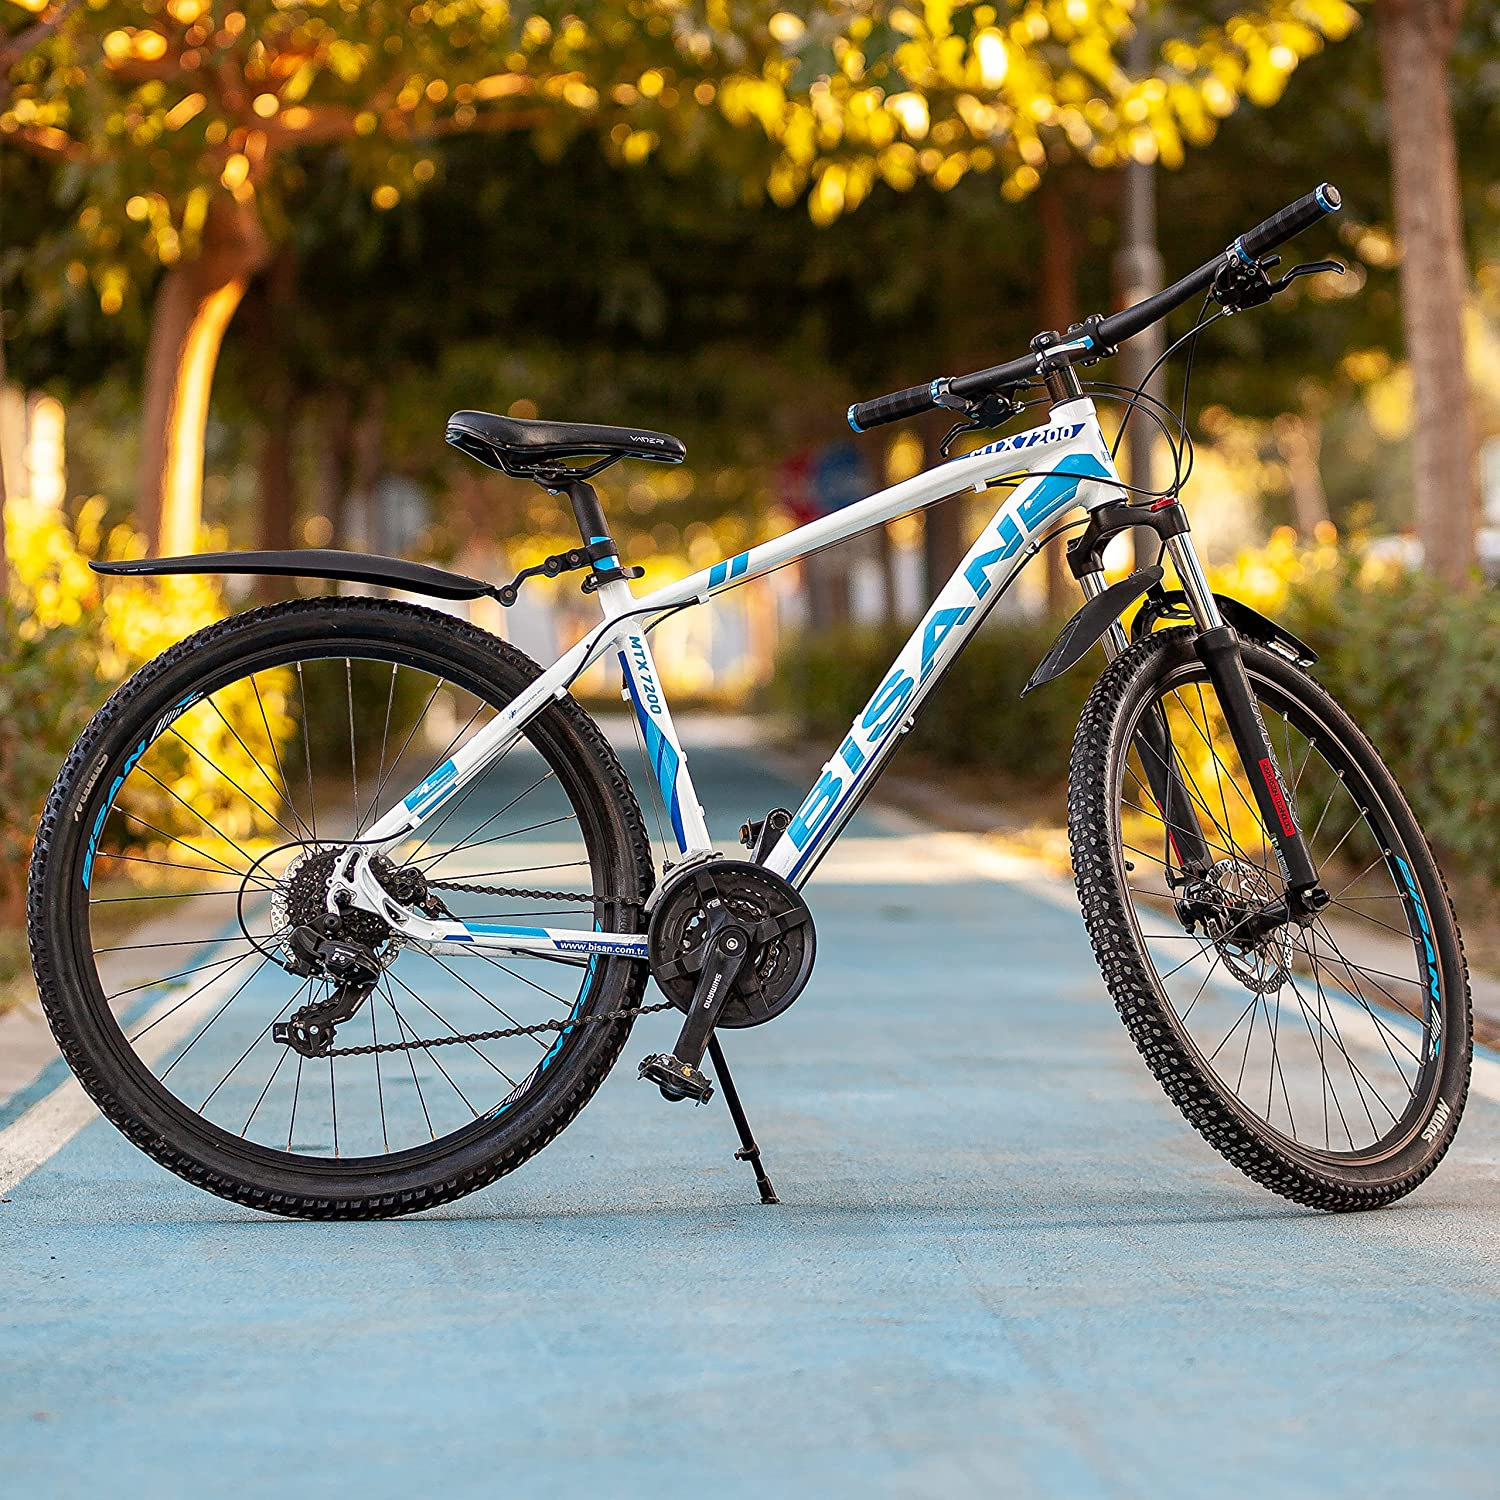 Adding mountain bike fenders like these can give your bike a unique look. Mountain bike fender accessories then take this look to the next level. 